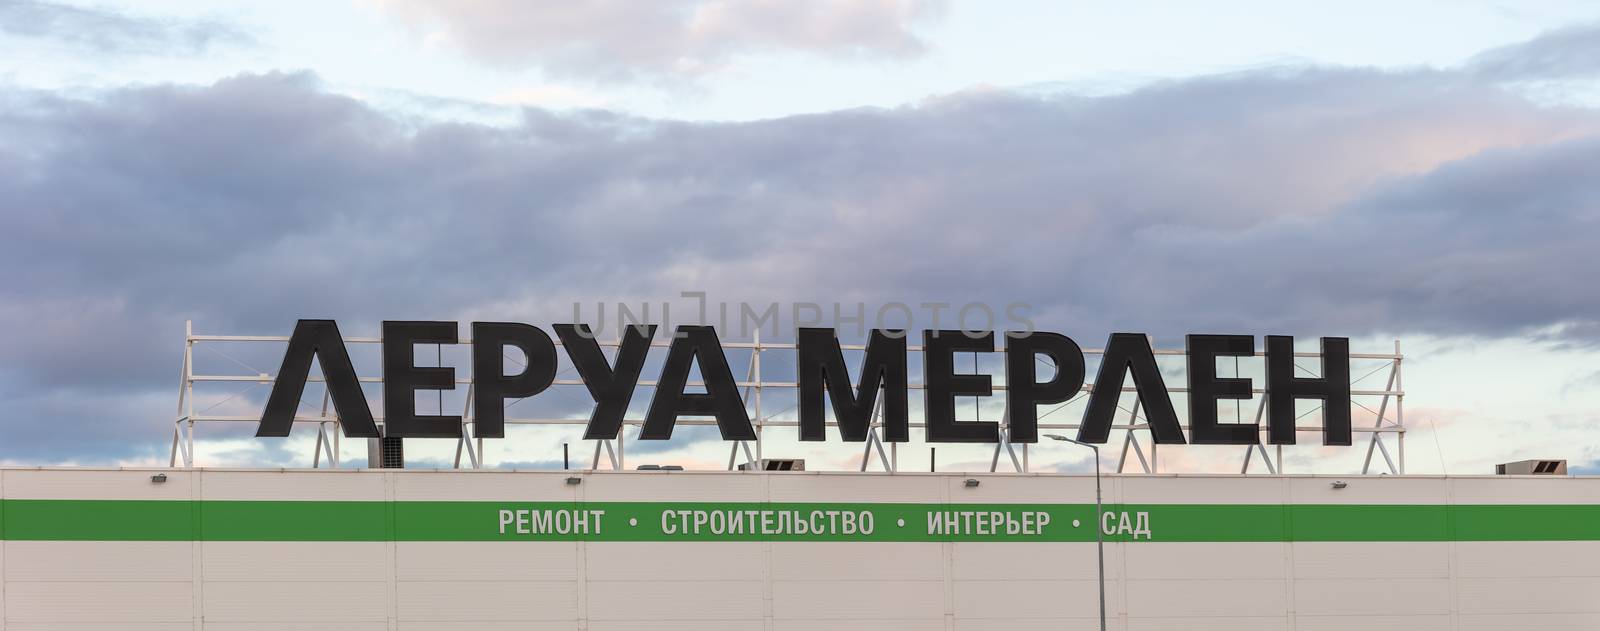 Barnaul, Russia - September 18, 2020: Panoramic shot of the front sign in Leroy Merlin construction store. Cloudy sunset sky as a background.